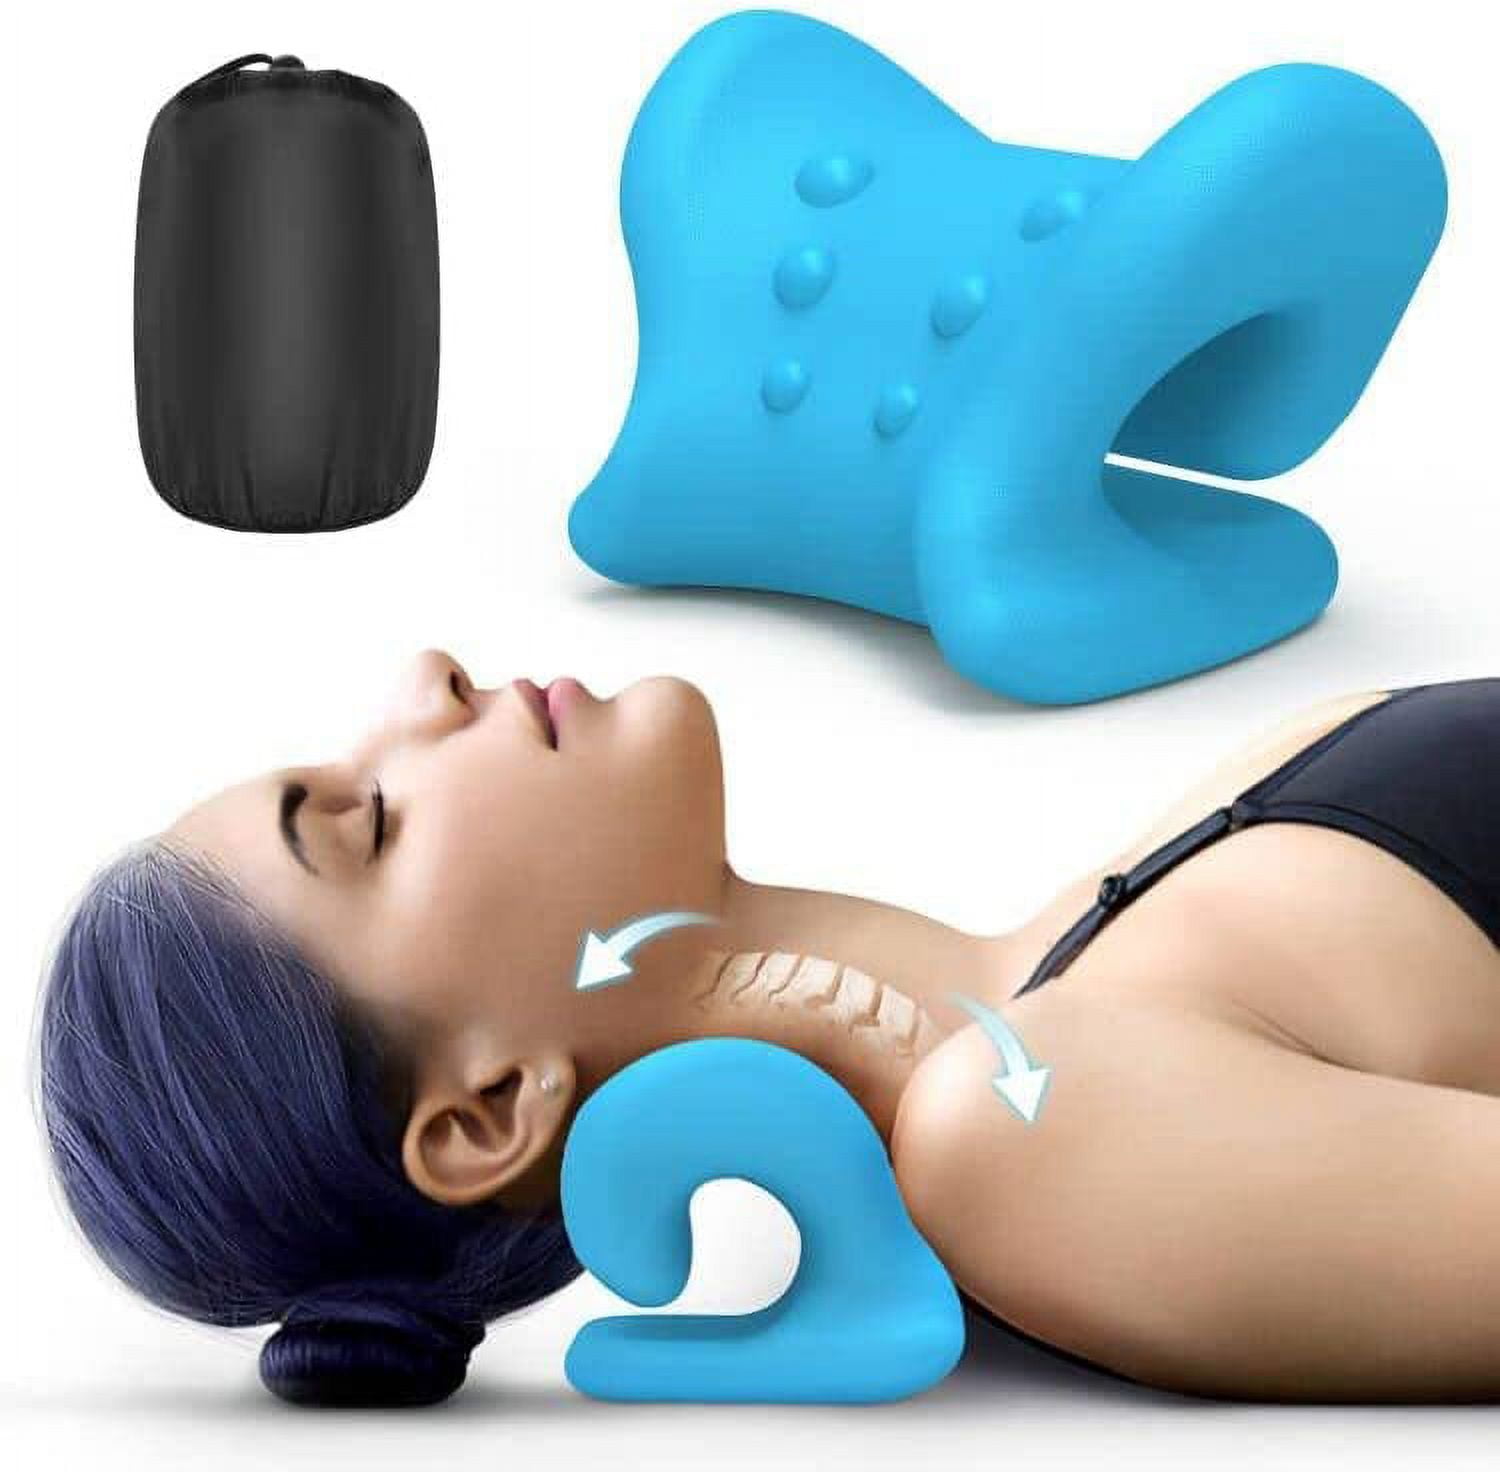 How to Use REST CLOUD Neck Stretcher Neck and Shoulder Relaxer